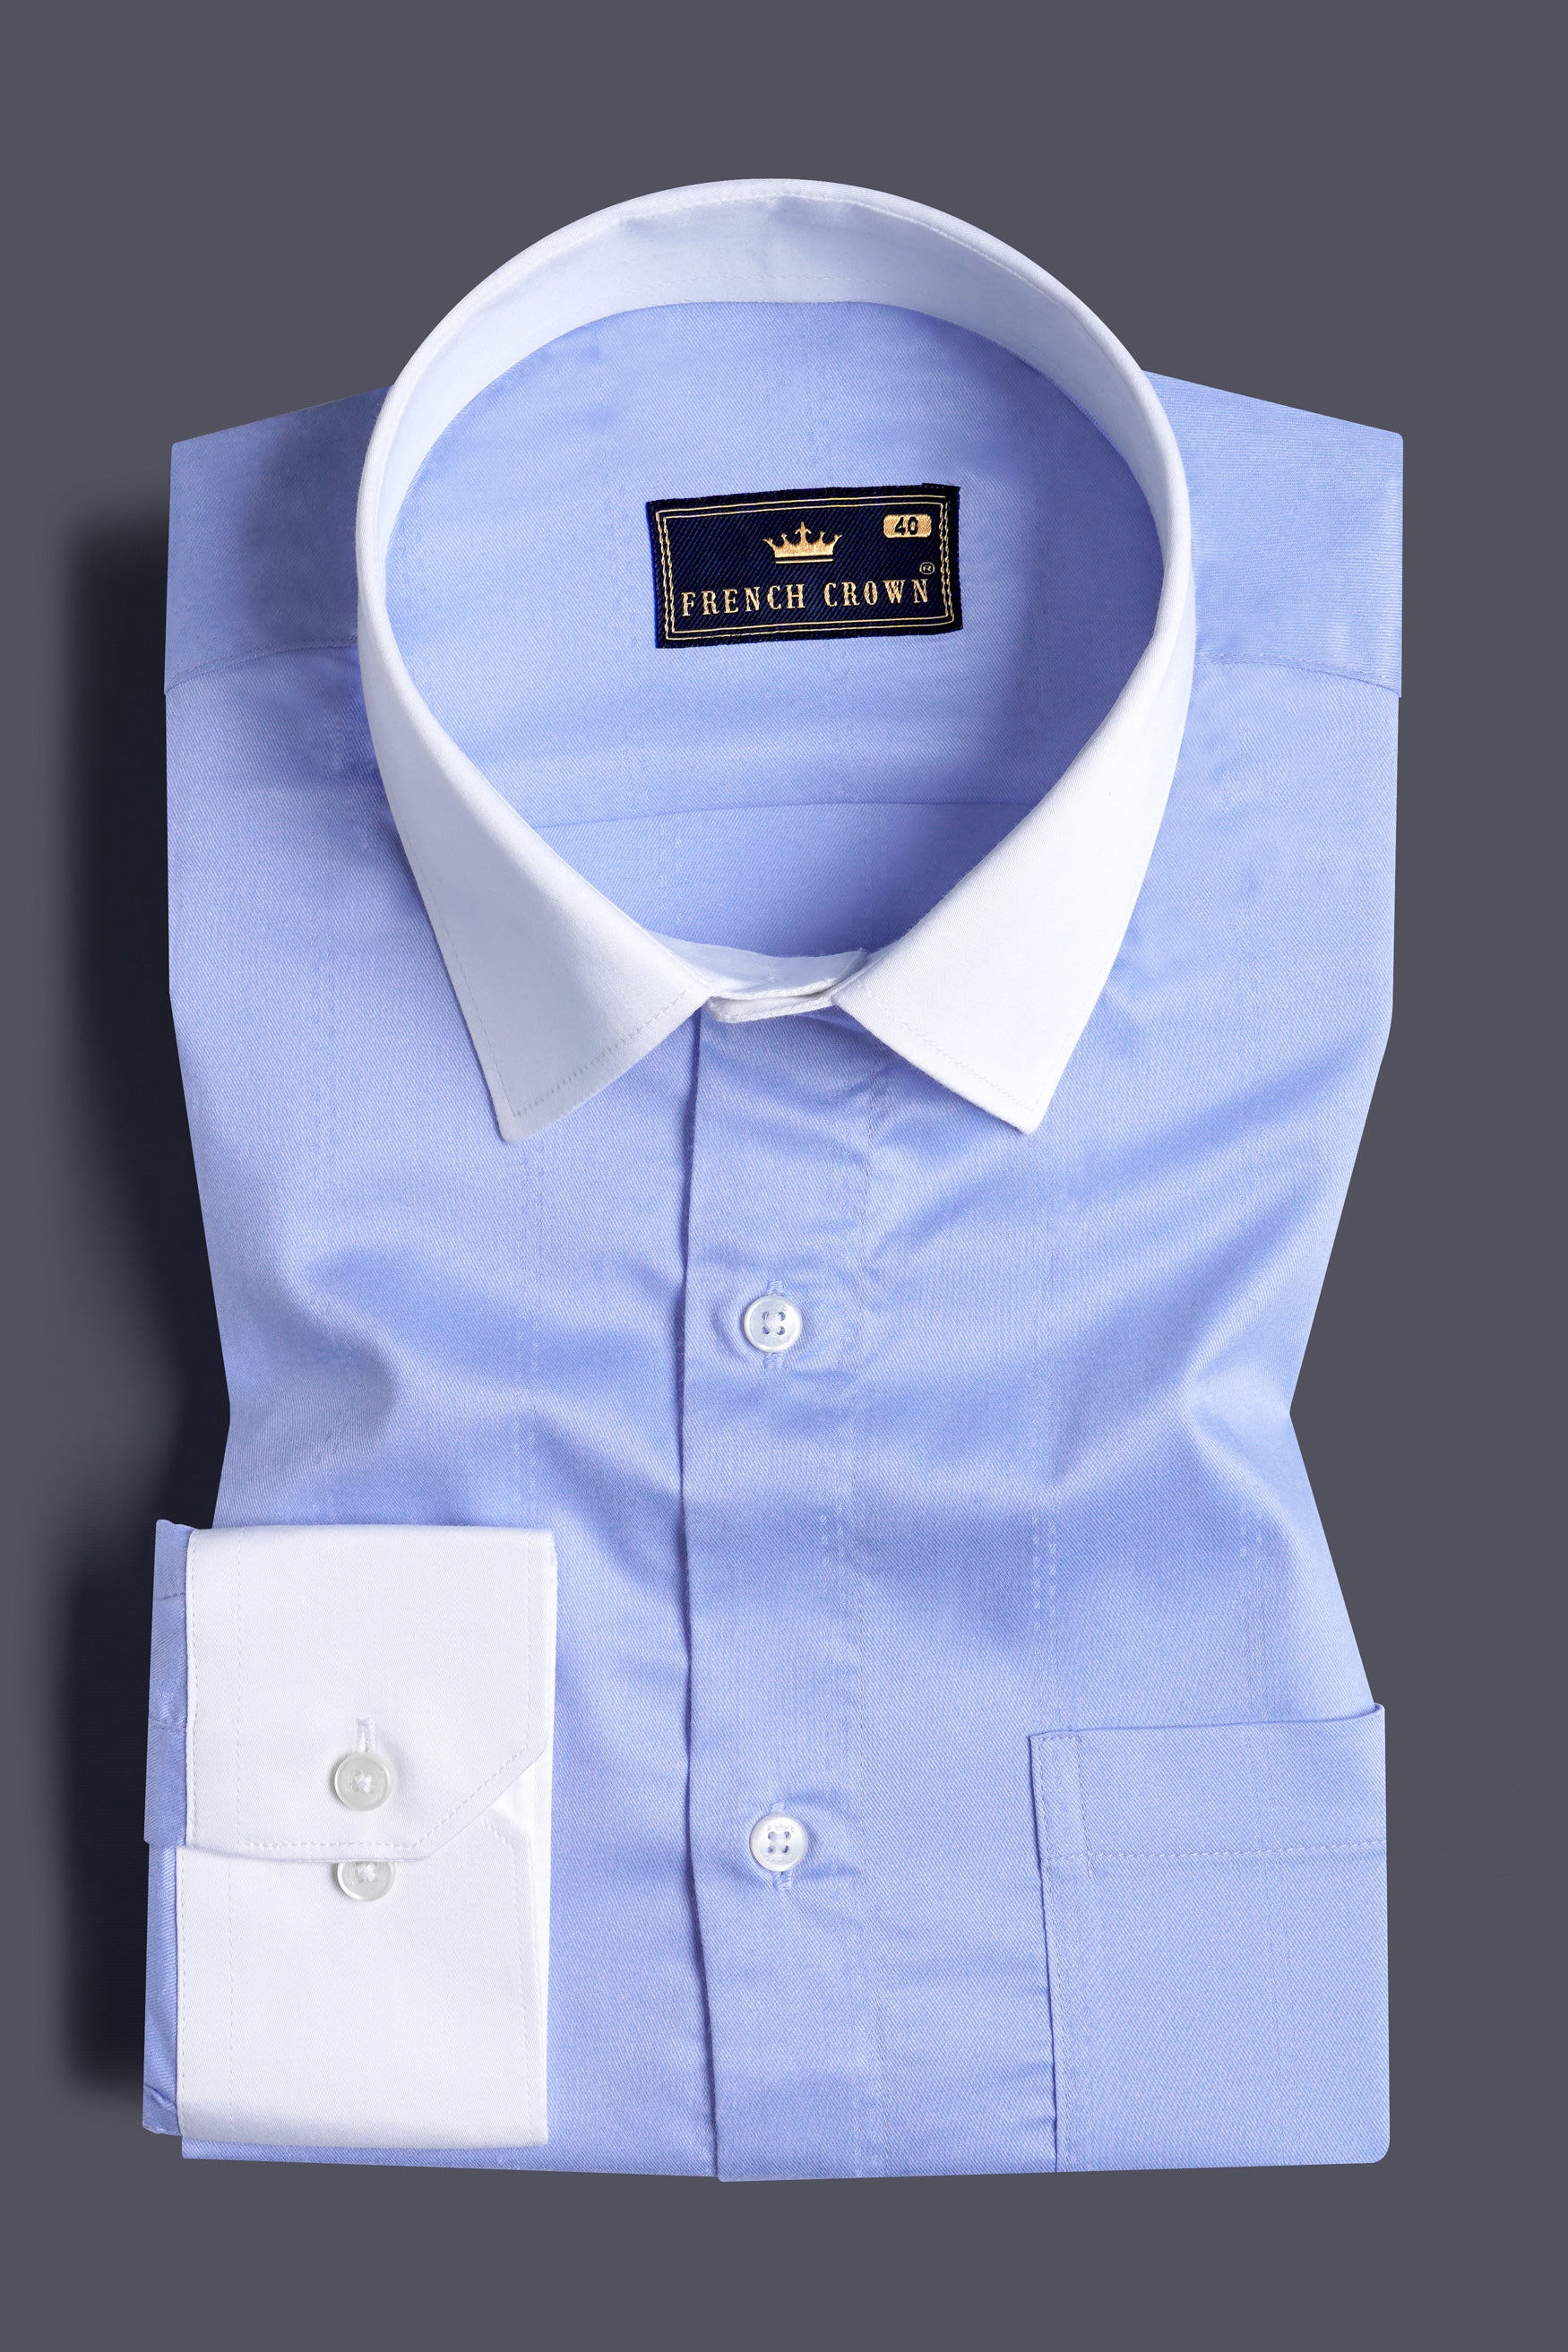 Periwinkle Blue with White Cuffs and Collar Twill Premium Cotton Shirt 11734-WCC-38, 11734-WCC-H-38, 11734-WCC-39, 11734-WCC-H-39, 11734-WCC-40, 11734-WCC-H-40, 11734-WCC-42, 11734-WCC-H-42, 11734-WCC-44, 11734-WCC-H-44, 11734-WCC-46, 11734-WCC-H-46, 11734-WCC-48, 11734-WCC-H-48, 11734-WCC-50, 11734-WCC-H-50, 11734-WCC-52, 11734-WCC-H-52